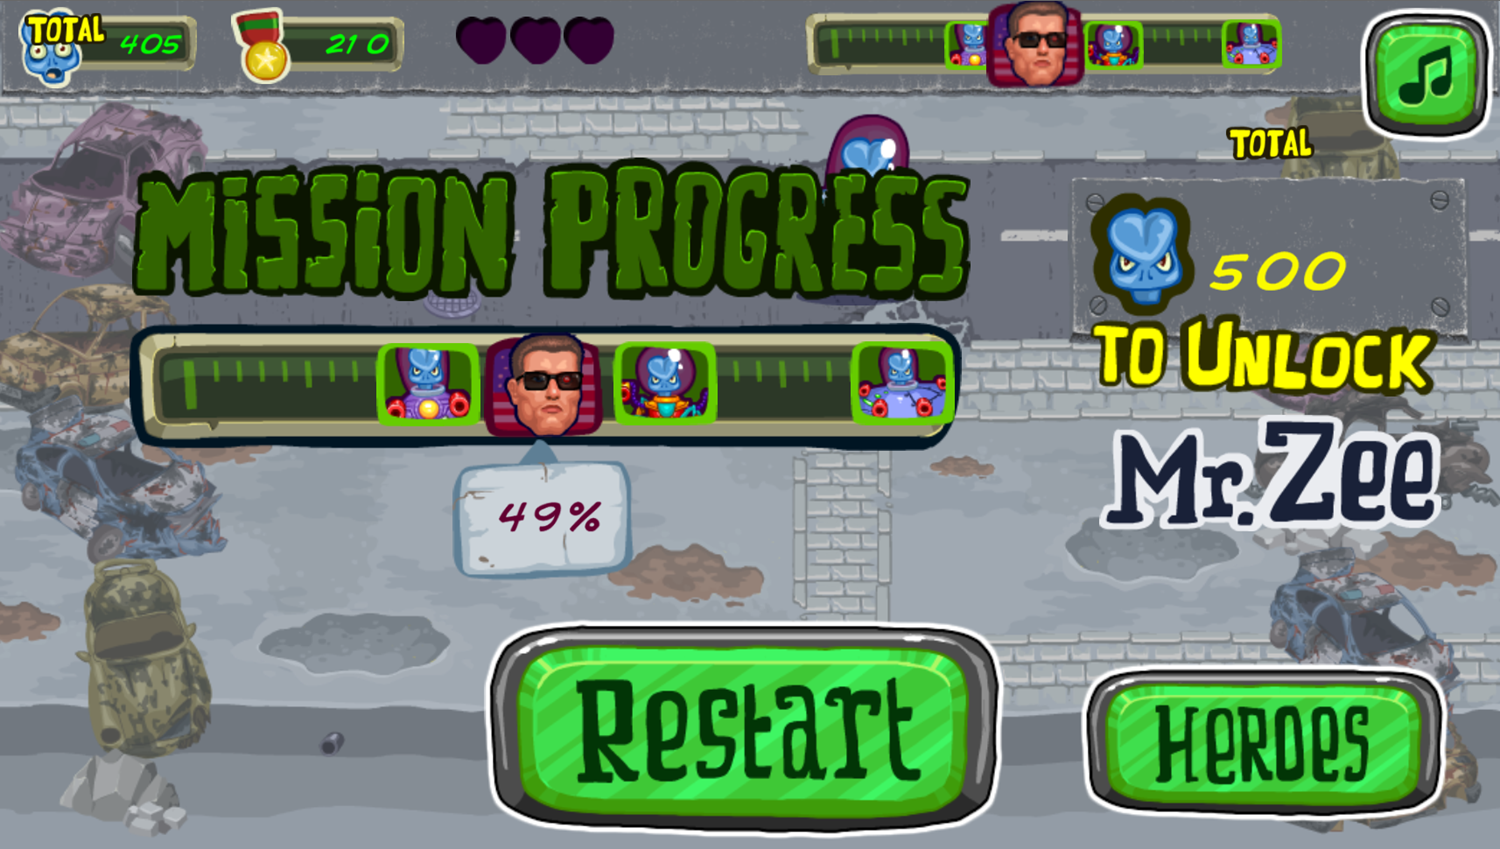 Aliens Attack Game Over Screenshot.